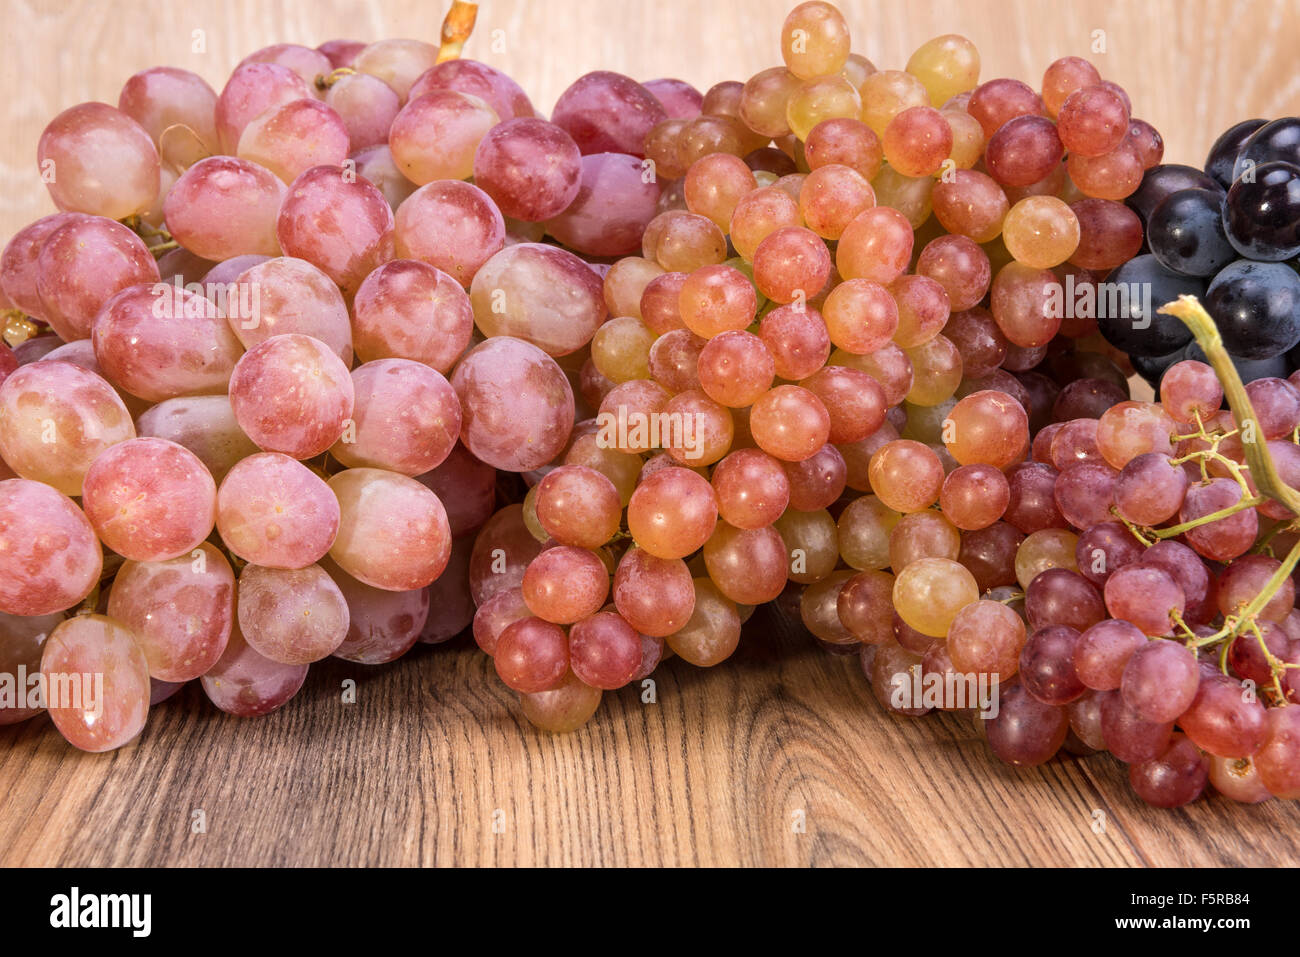 Pink dessert grapes from Central Asia (Samarkand) Stock Photo